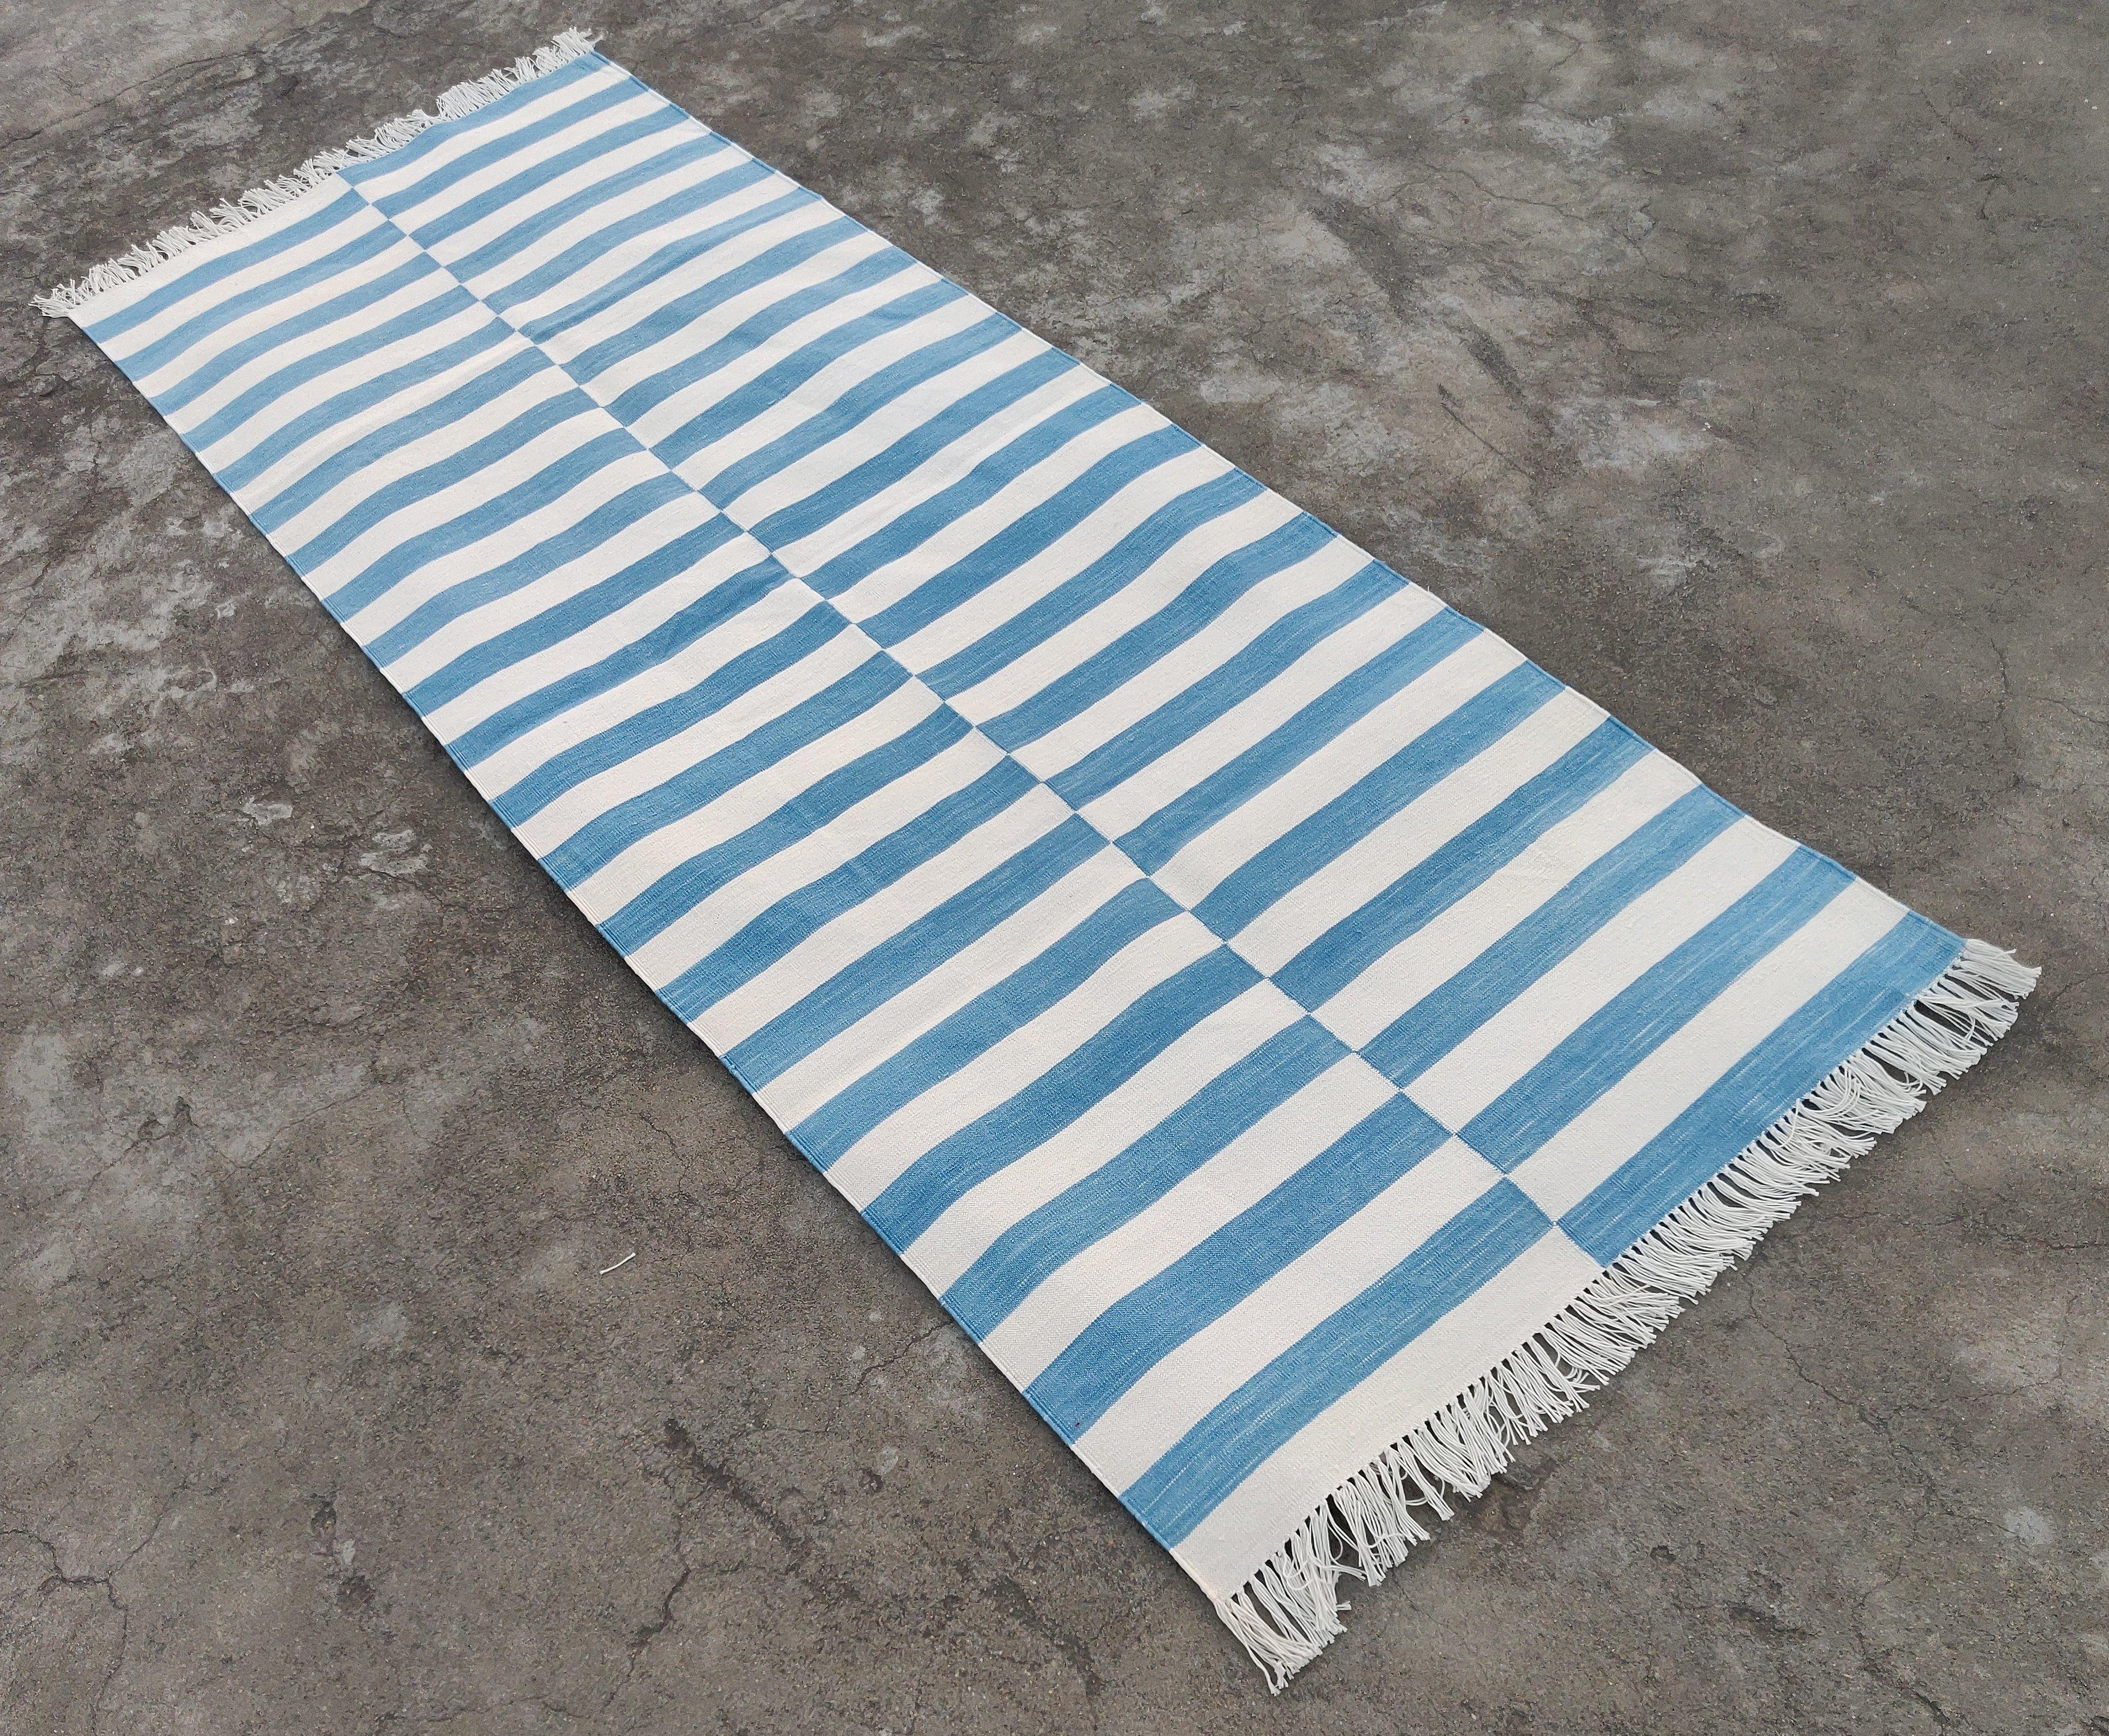 Cotton Natural Vegetable Dyed, Blue And White Striped Indian Dhurrie Runner-2.5x7 (75x210cm)
These special flat-weave dhurries are hand-woven with 15 ply 100% cotton yarn. Due to the special manufacturing techniques used to create our rugs, the size